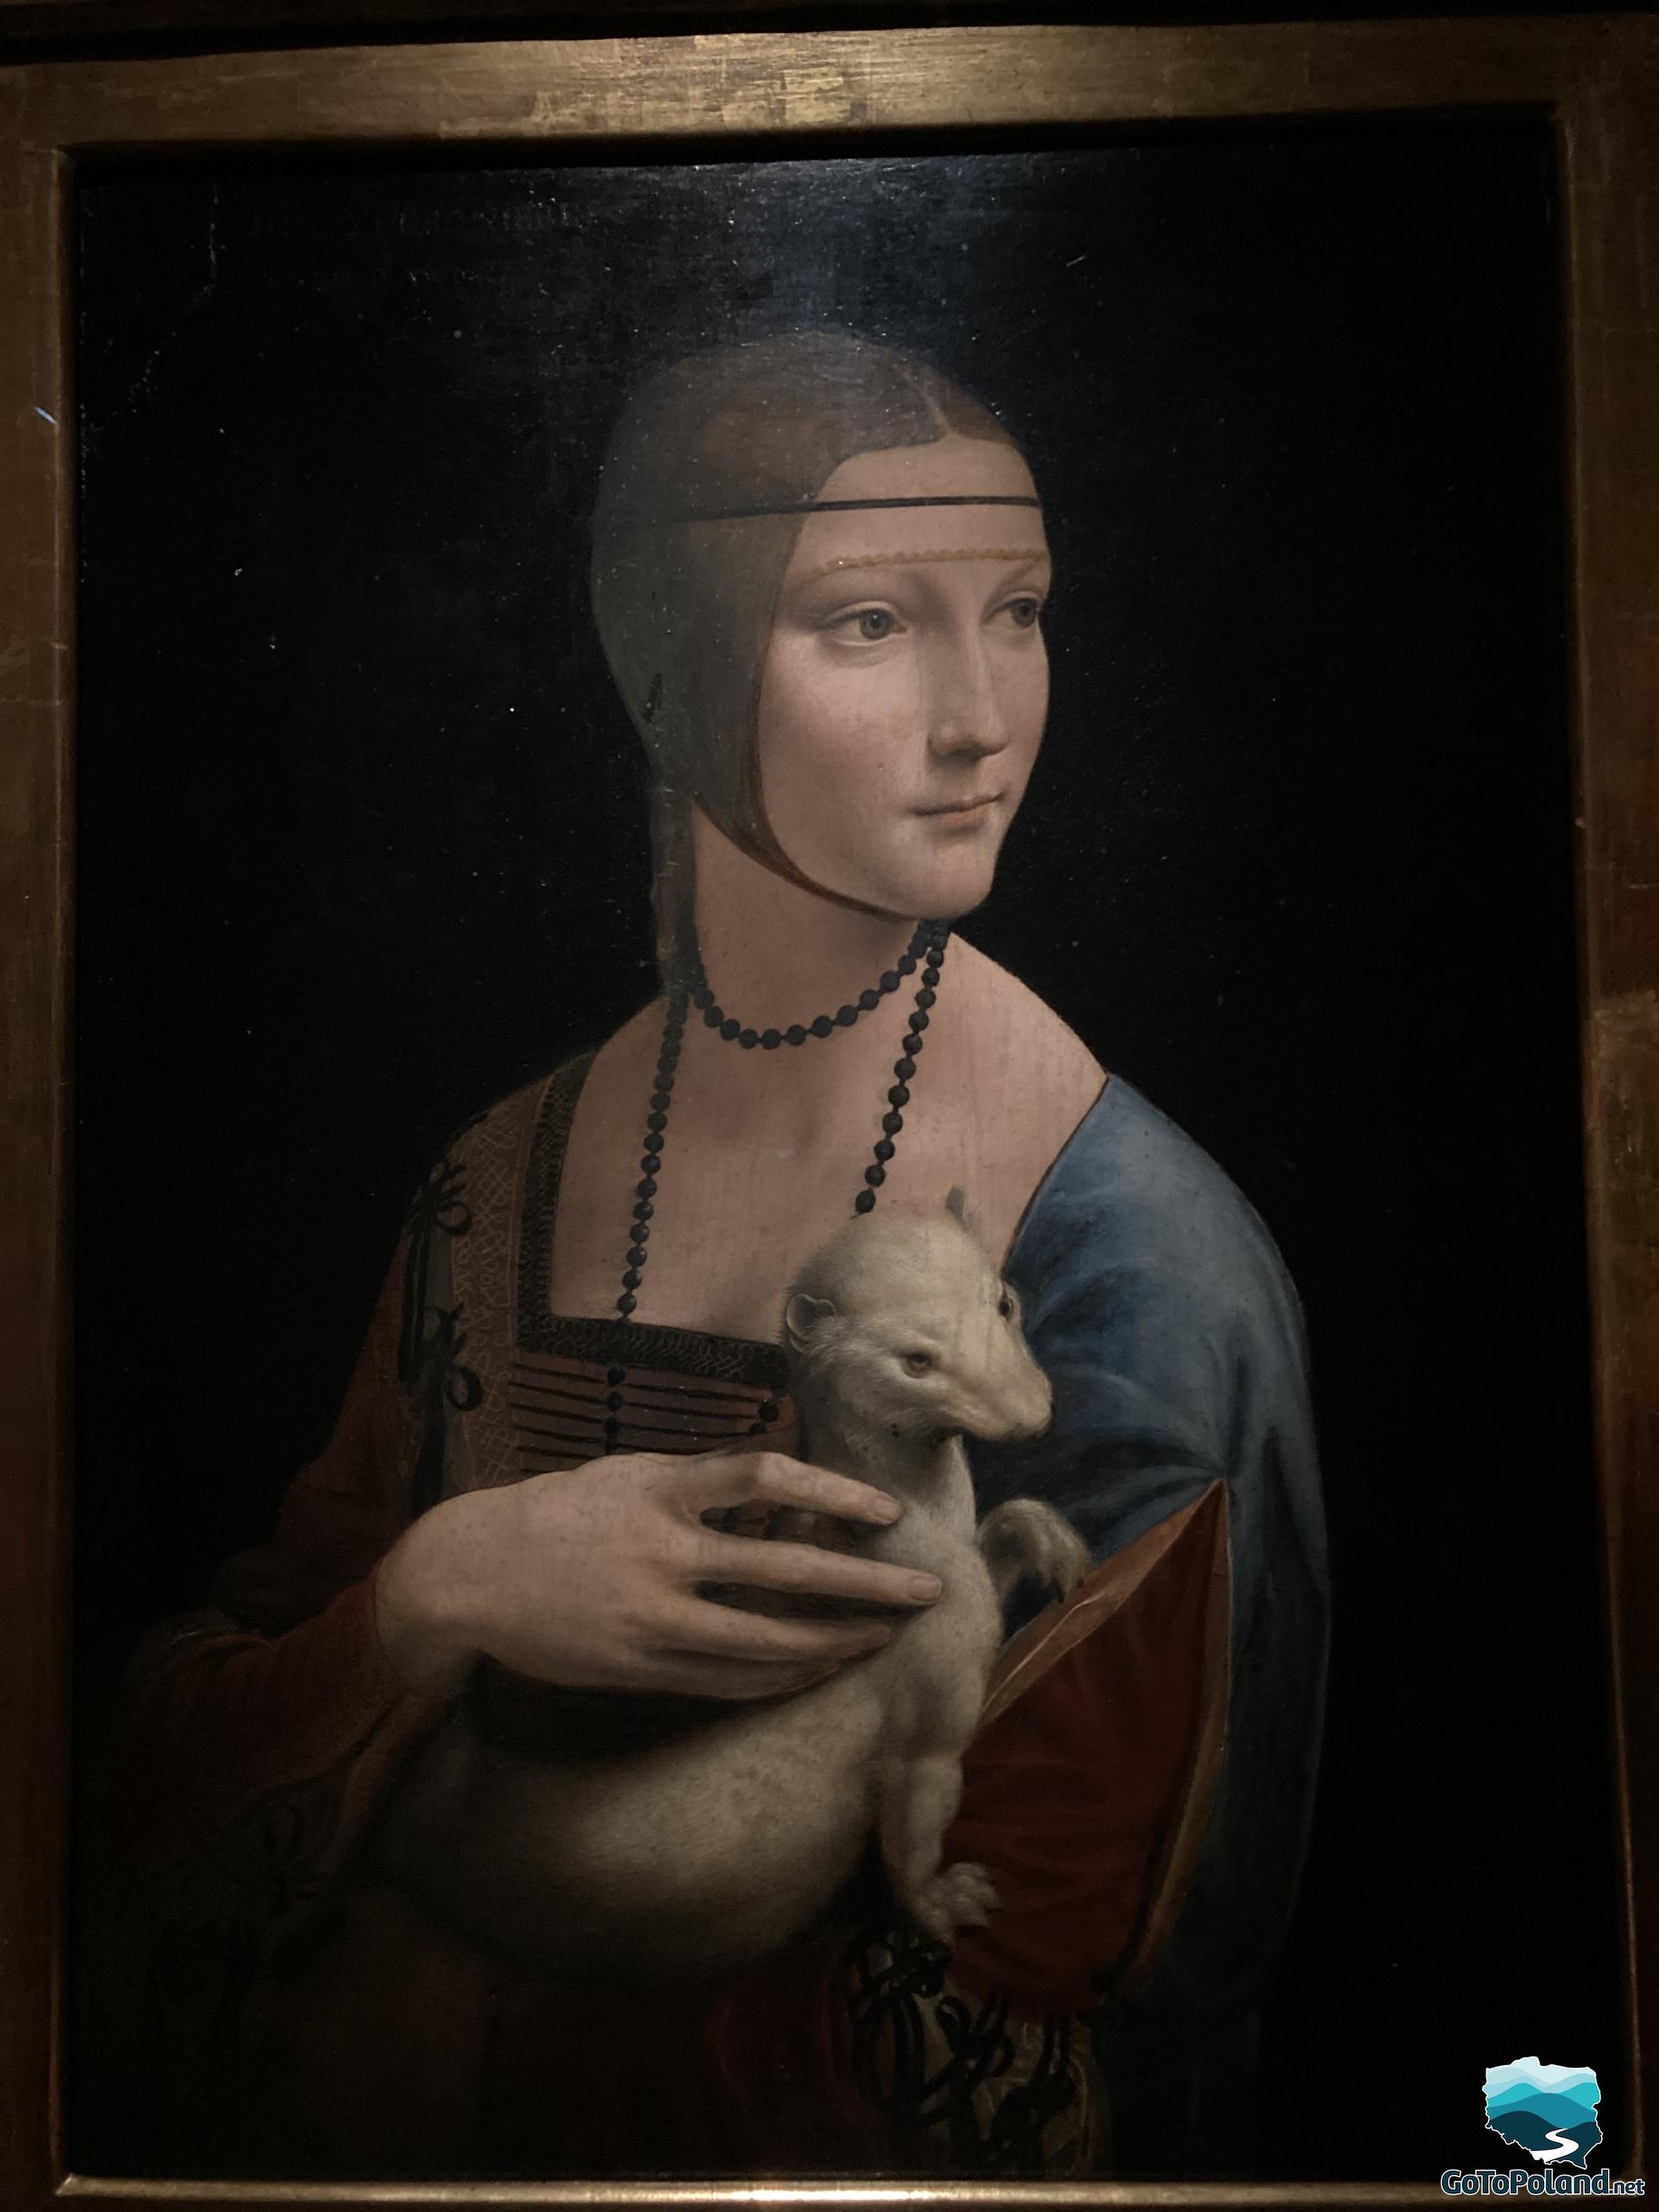 The painting Lady with an Ermine close up by Leonardo da Vinci 